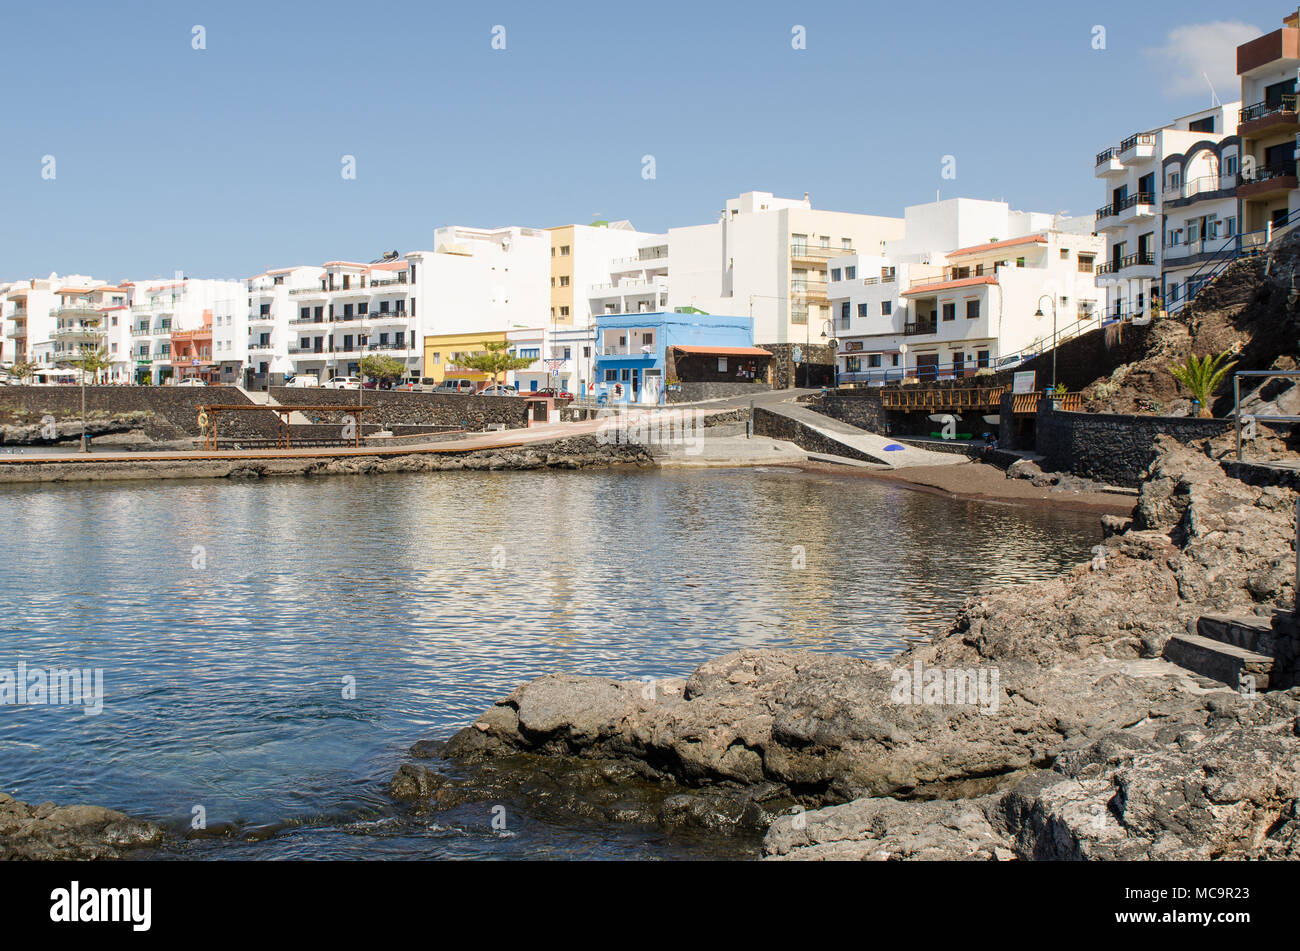 La Restinga, seaside village in the south of the El Hierro, privileged region for divind. Canary island, Spain. Stock Photo